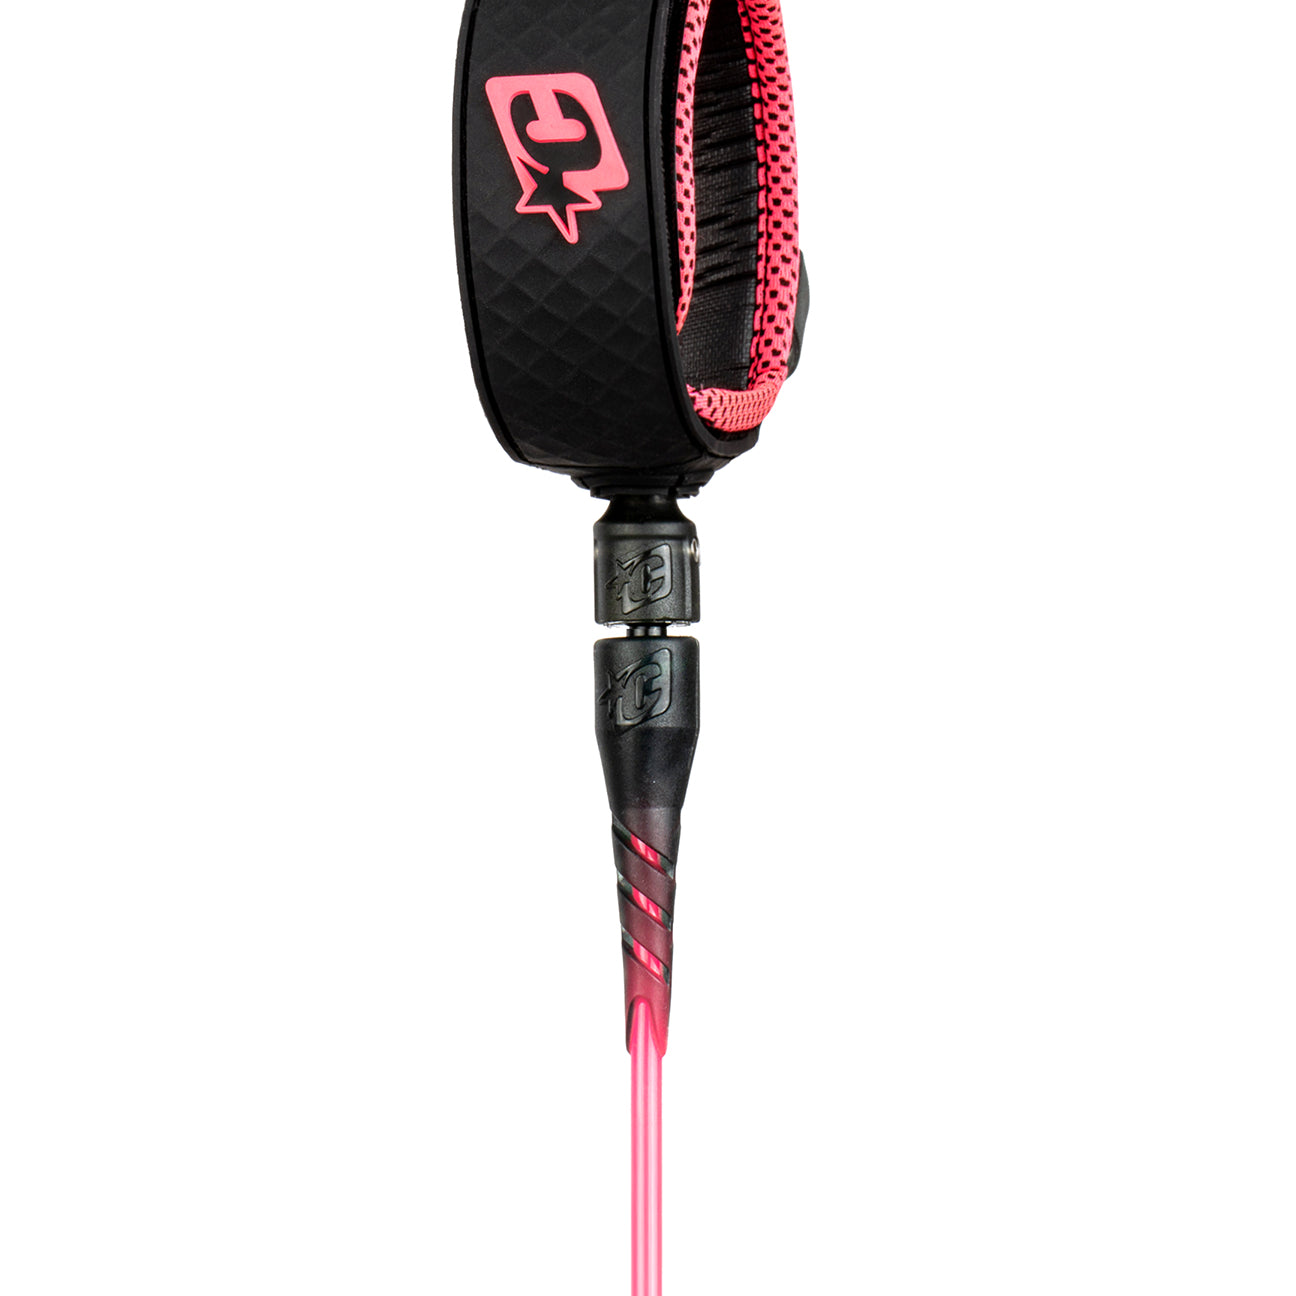 Creatures of Leisure Reliance Lite Leash Pink-Black 6ft0in